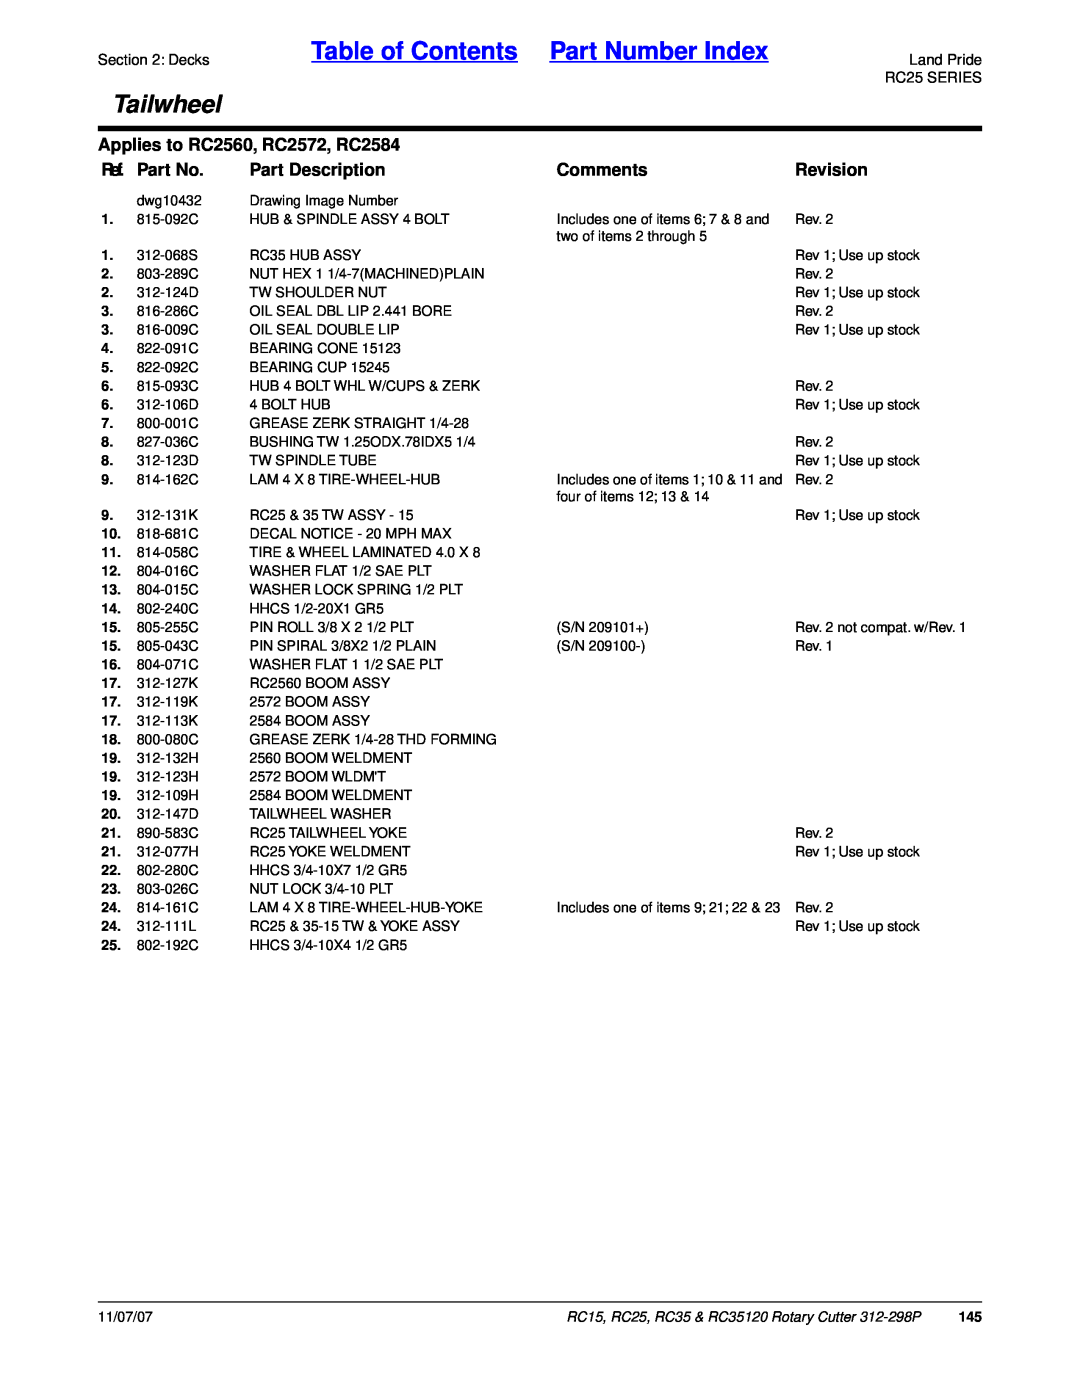 Land Pride RC35 Table of Contents Part Number Index, Tailwheel, Applies to RC2560, RC2572, RC2584, Ref. Part No, Comments 